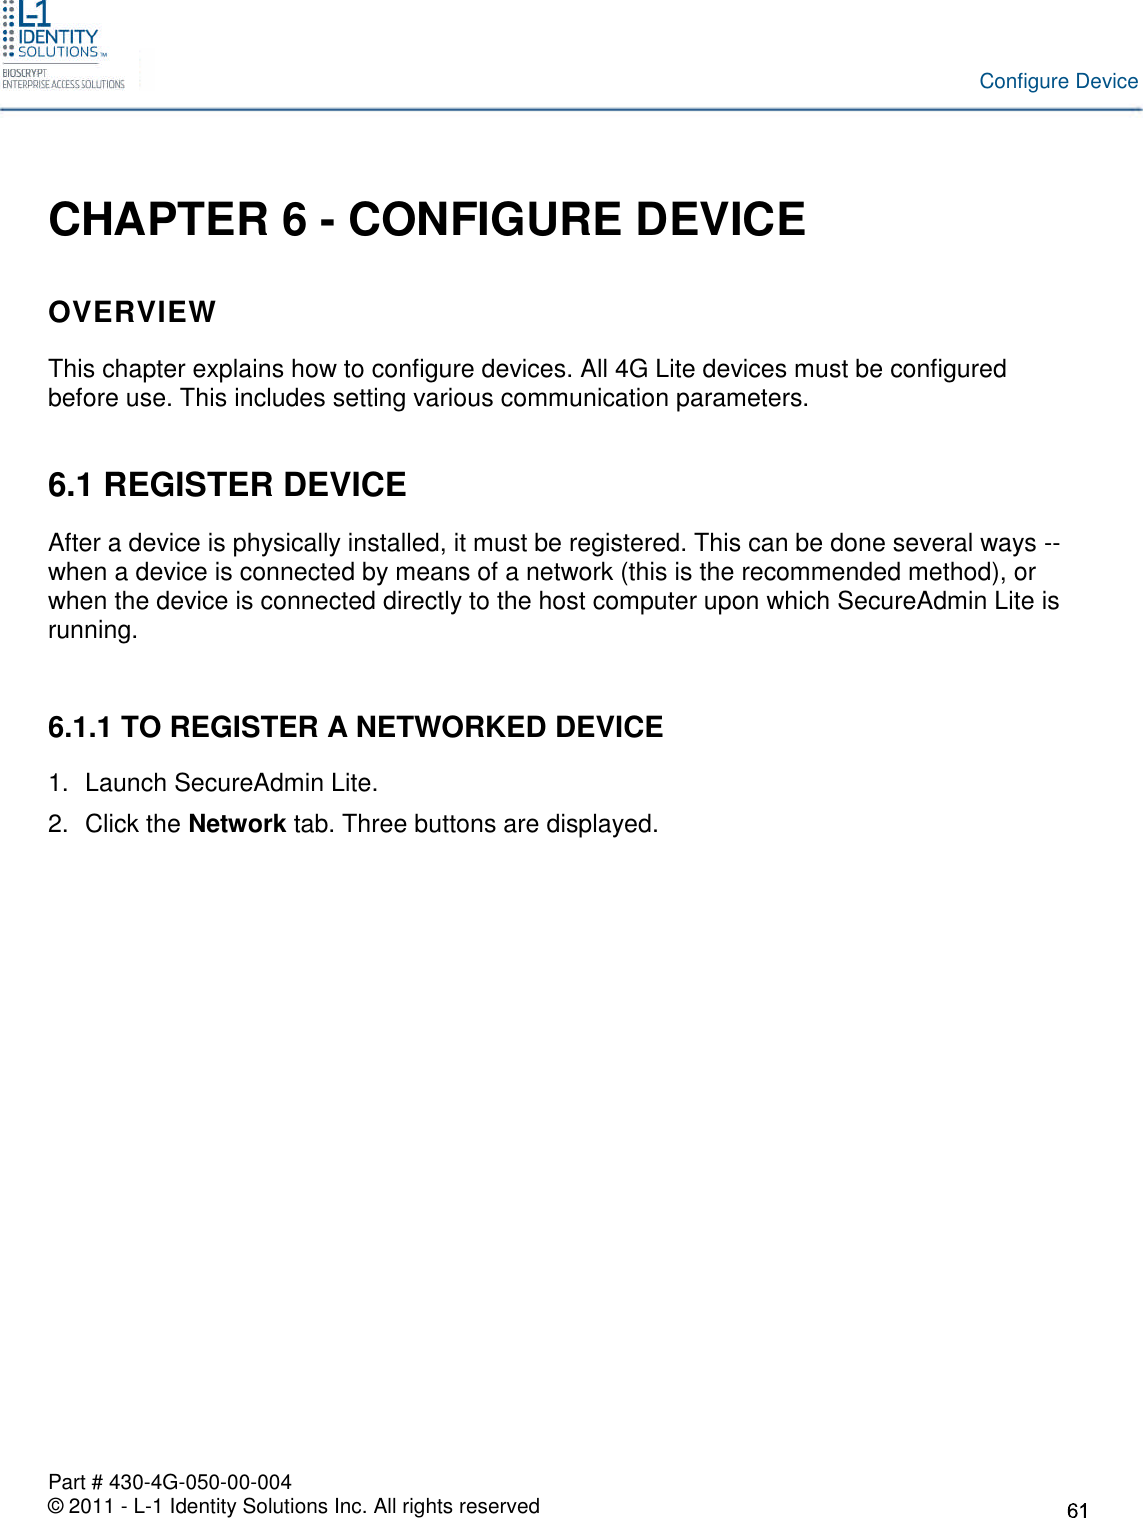 Part # 430-4G-050-00-004© 2011 - L-1 Identity Solutions Inc. All rights reservedConfigure DeviceCHAPTER 6 - CONFIGURE DEVICEOVERVIEWThis chapter explains how to configure devices. All 4G Lite devices must be configuredbefore use. This includes setting various communication parameters.6.1 REGISTER DEVICEAfter a device is physically installed, it must be registered. This can be done several ways --when a device is connected by means of a network (this is the recommended method), orwhen the device is connected directly to the host computer upon which SecureAdmin Lite isrunning.6.1.1 TO REGISTER A NETWORKED DEVICE1. Launch SecureAdmin Lite.2. Click the Network tab. Three buttons are displayed.